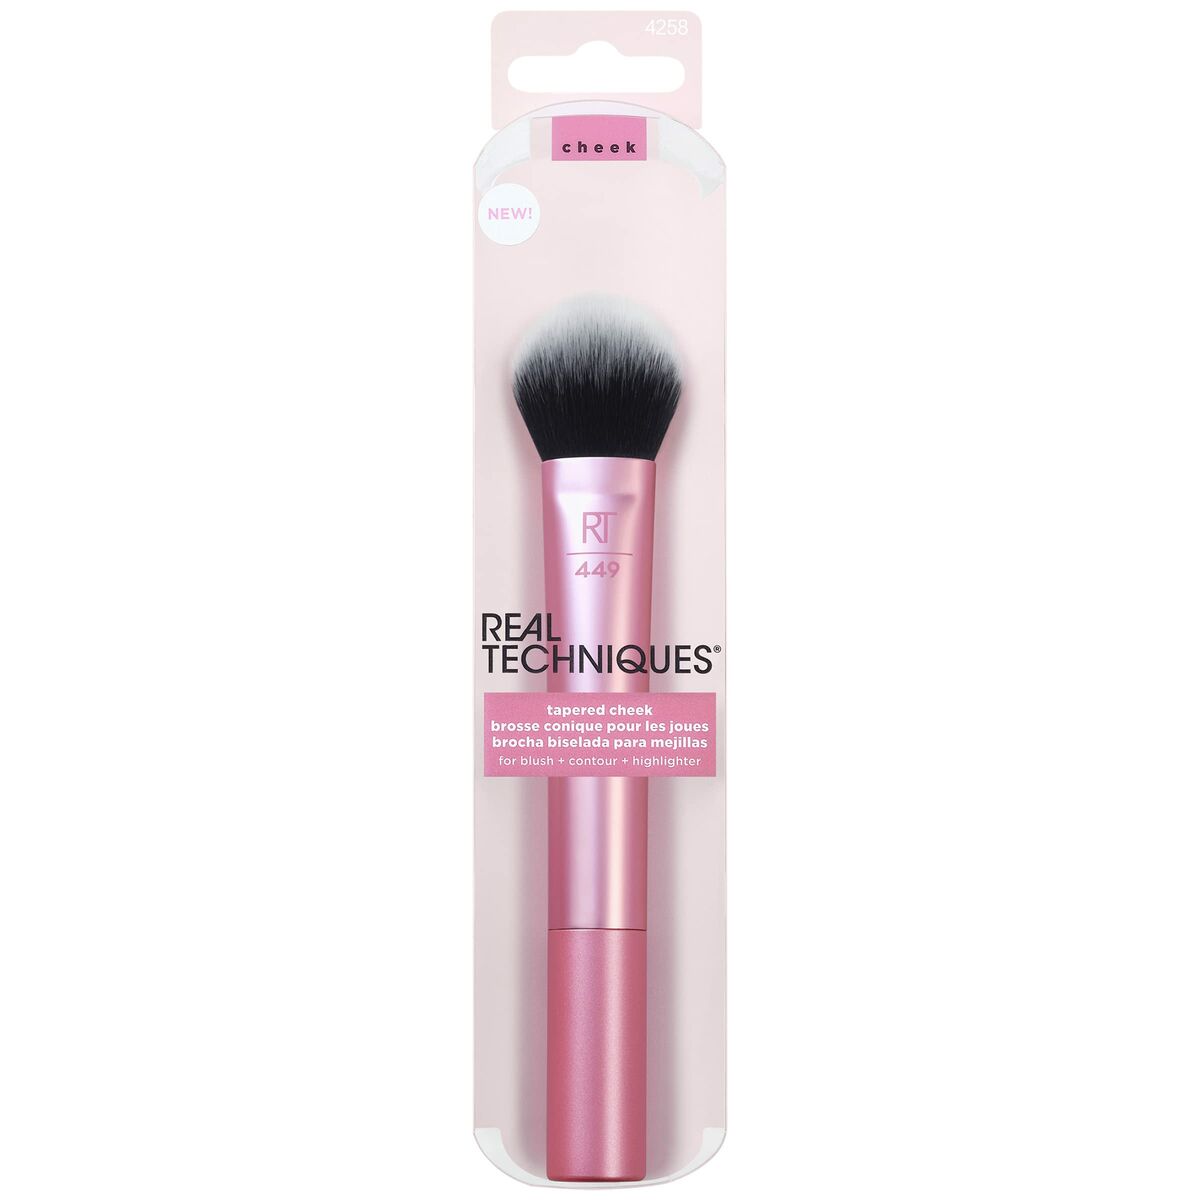 Make-up Brush Real Techniques Tapered Cheek (1 Unit)